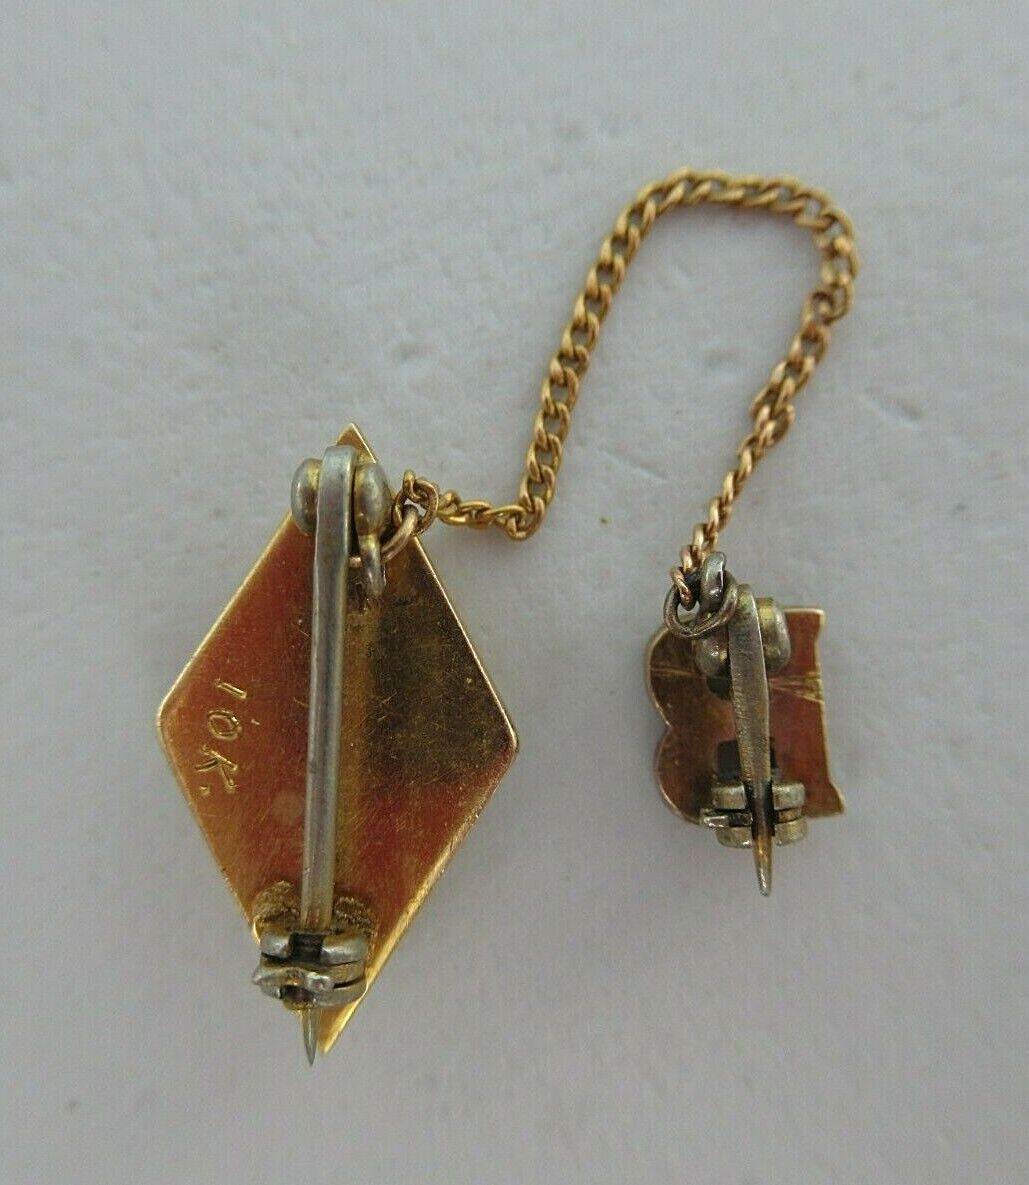 USA FRATERNITY PIN CHI PSI BETA. MADE IN GOLD 10K. 1554